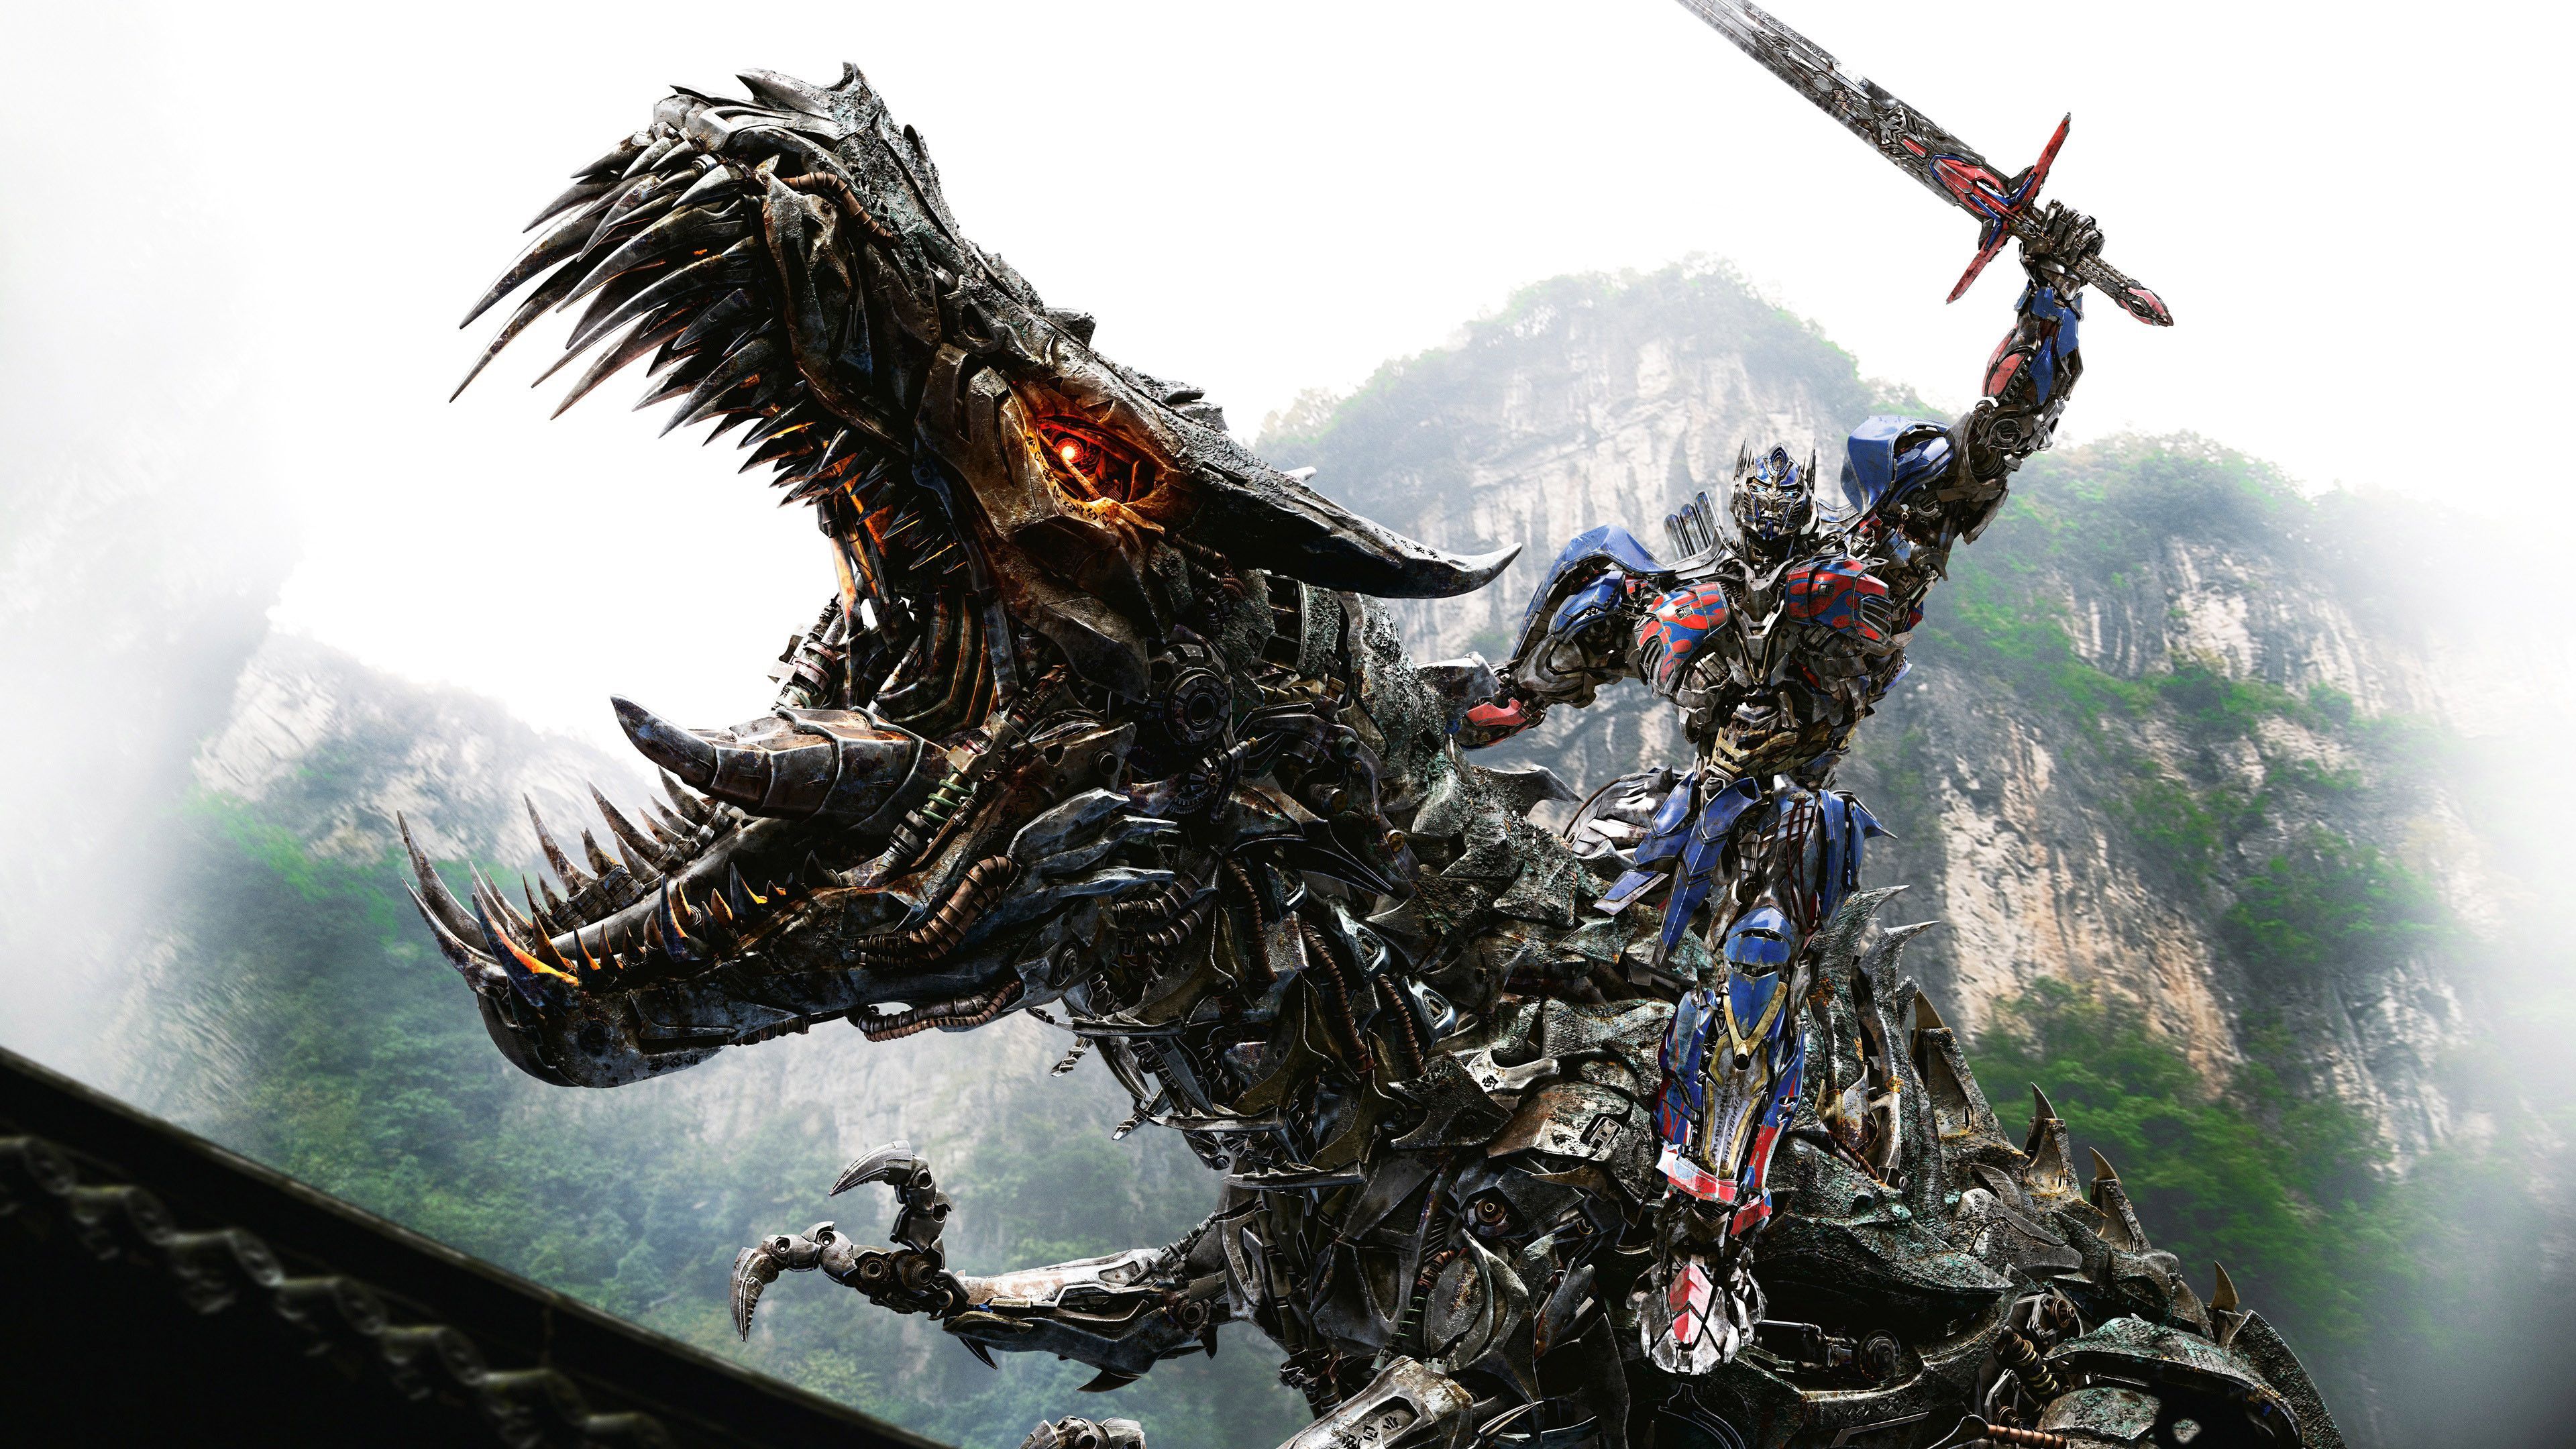 Cool Batman Picture Wallpaper in Movies PicsPaper.com. Transformers age of extinction, Transformers age, Transformers 4